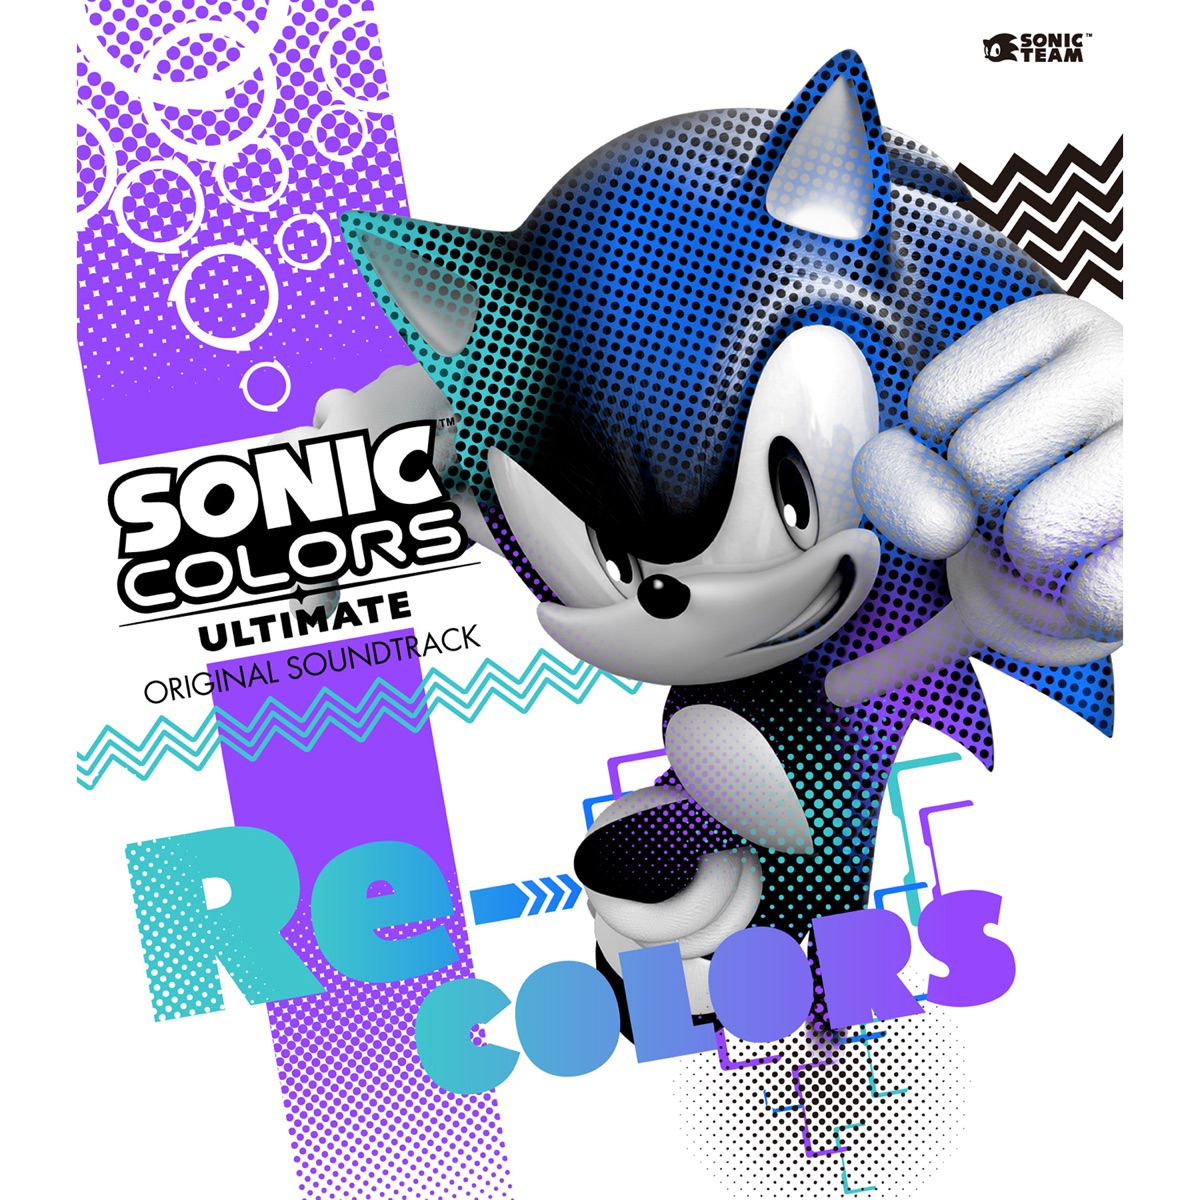 Sonic Colors Ultimate preview